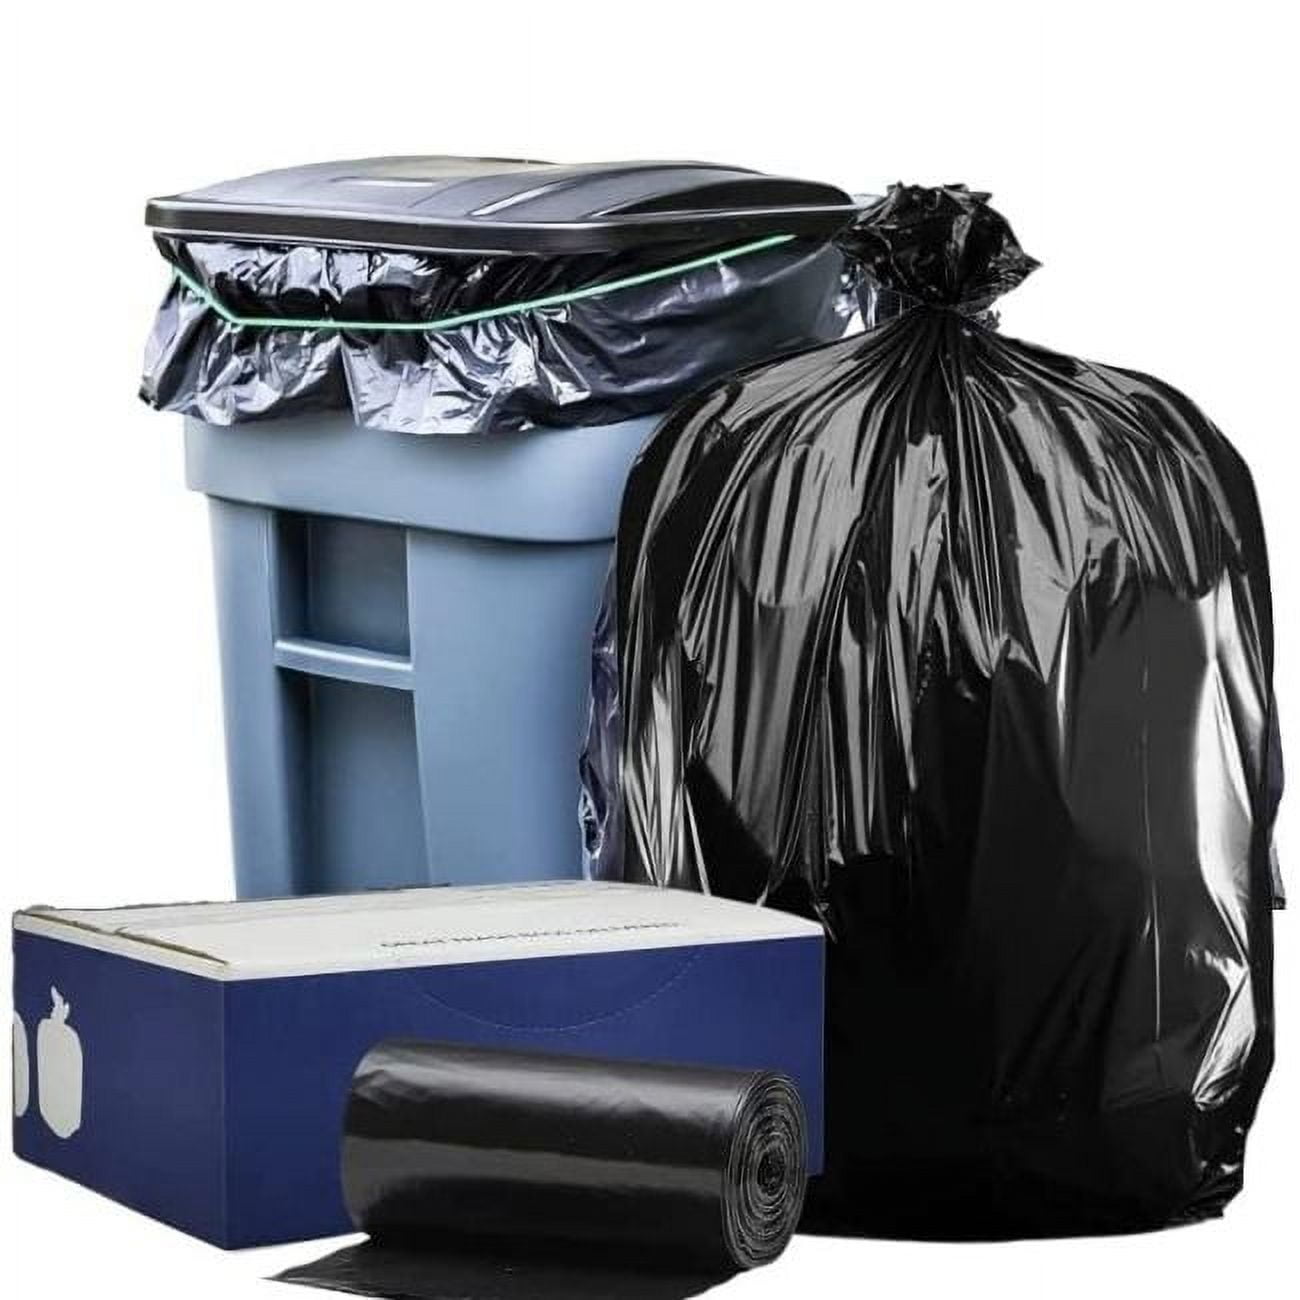 55 Gallon 36x56 2.0 mil. LLD Colored Trash Bags Can Liners